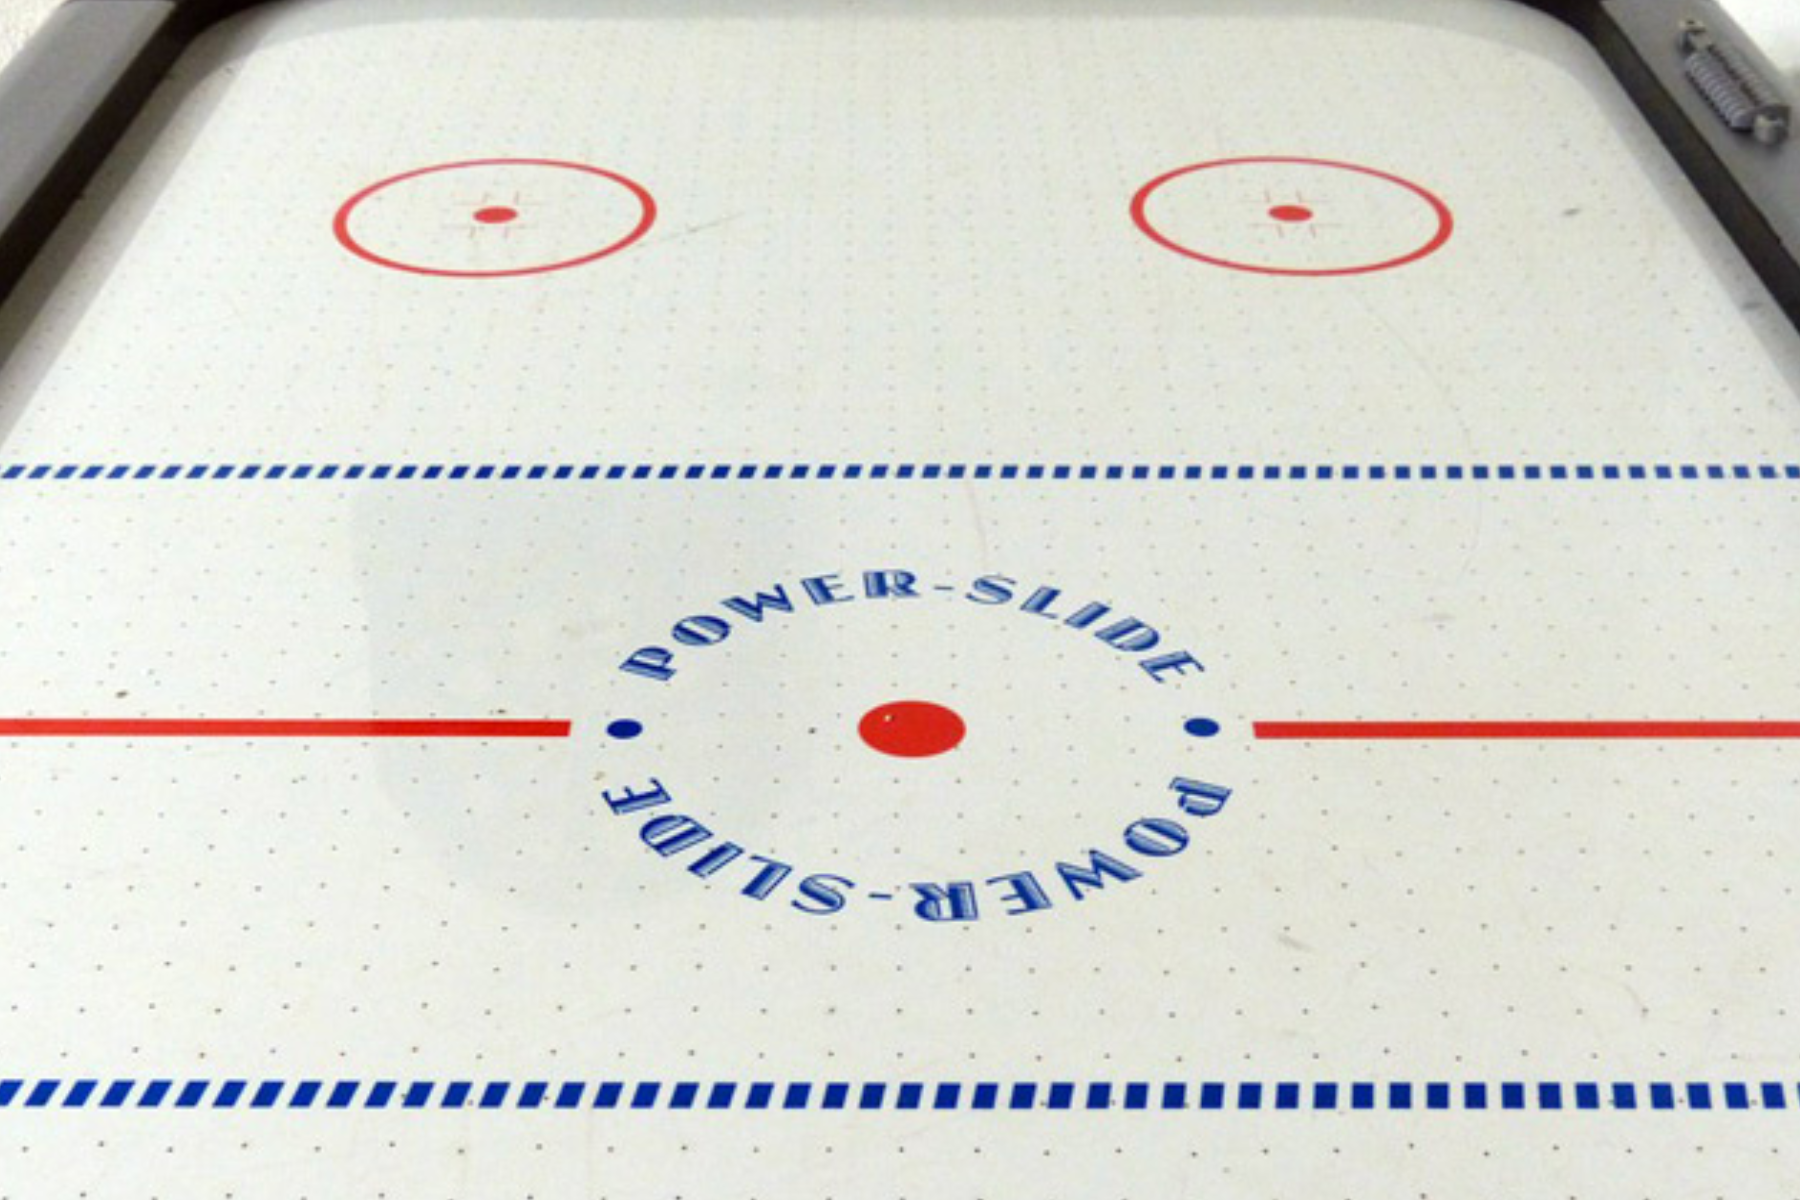 A view of the surface of an air hockey table